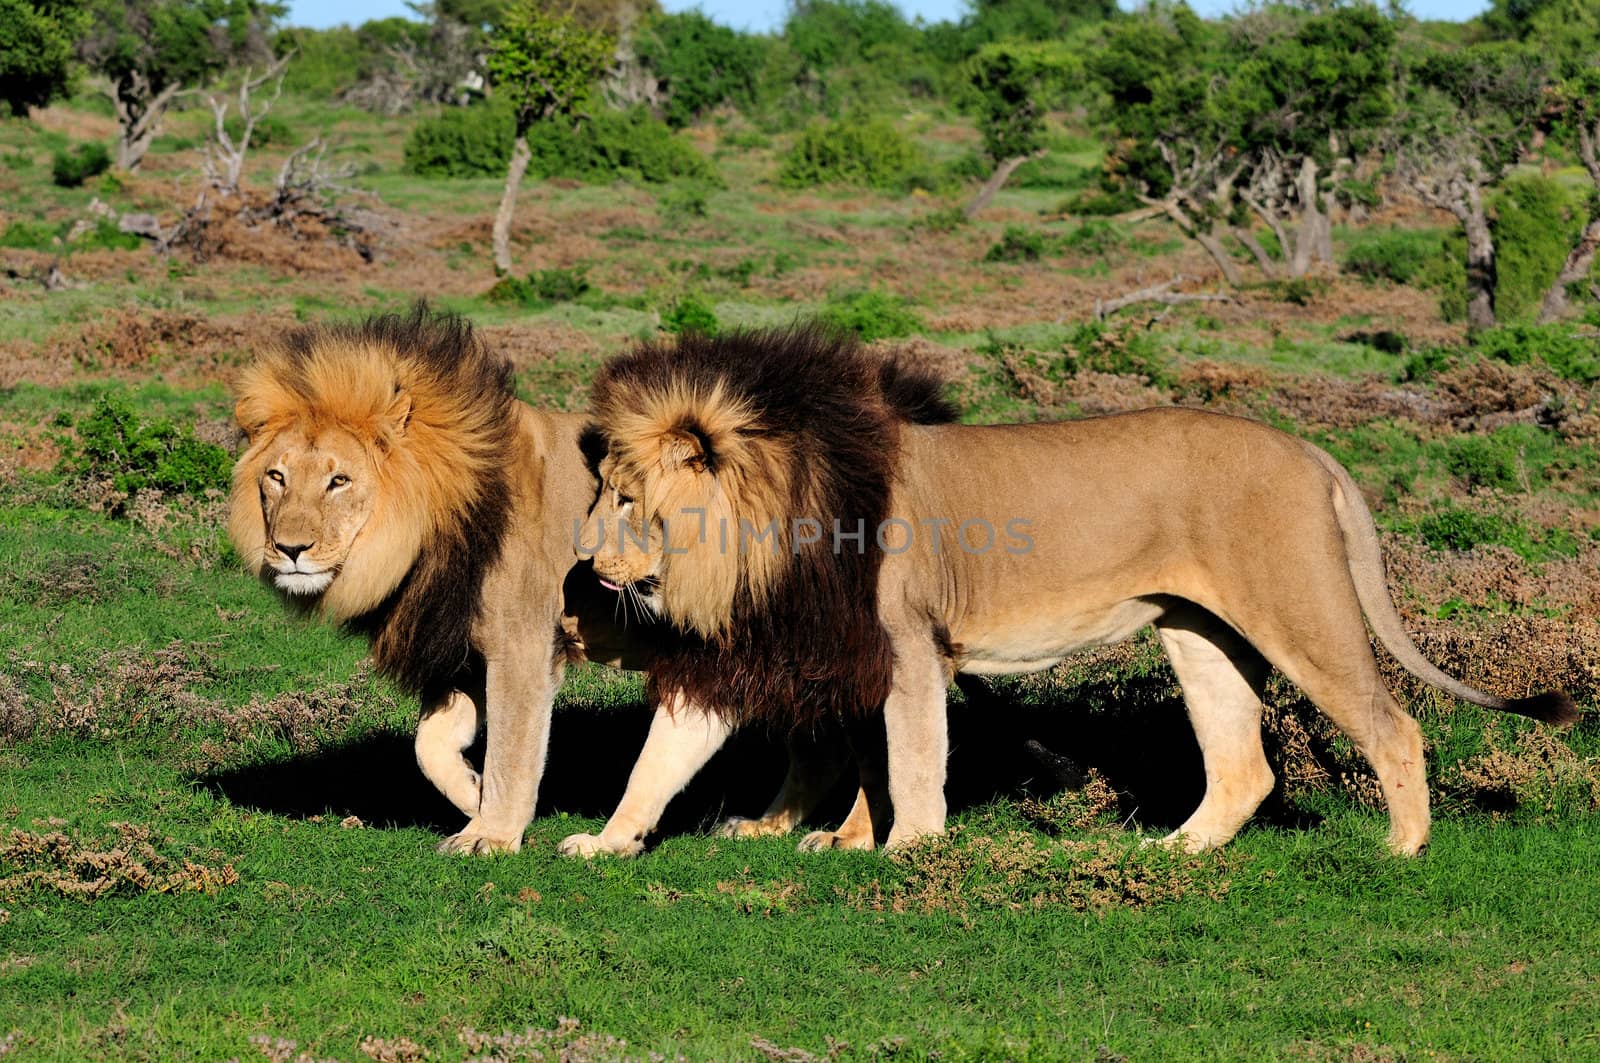 Two Kalahari lions, panthera leo, in the Kuzuko contractual area of the Addo Elephant National Park in South Africa